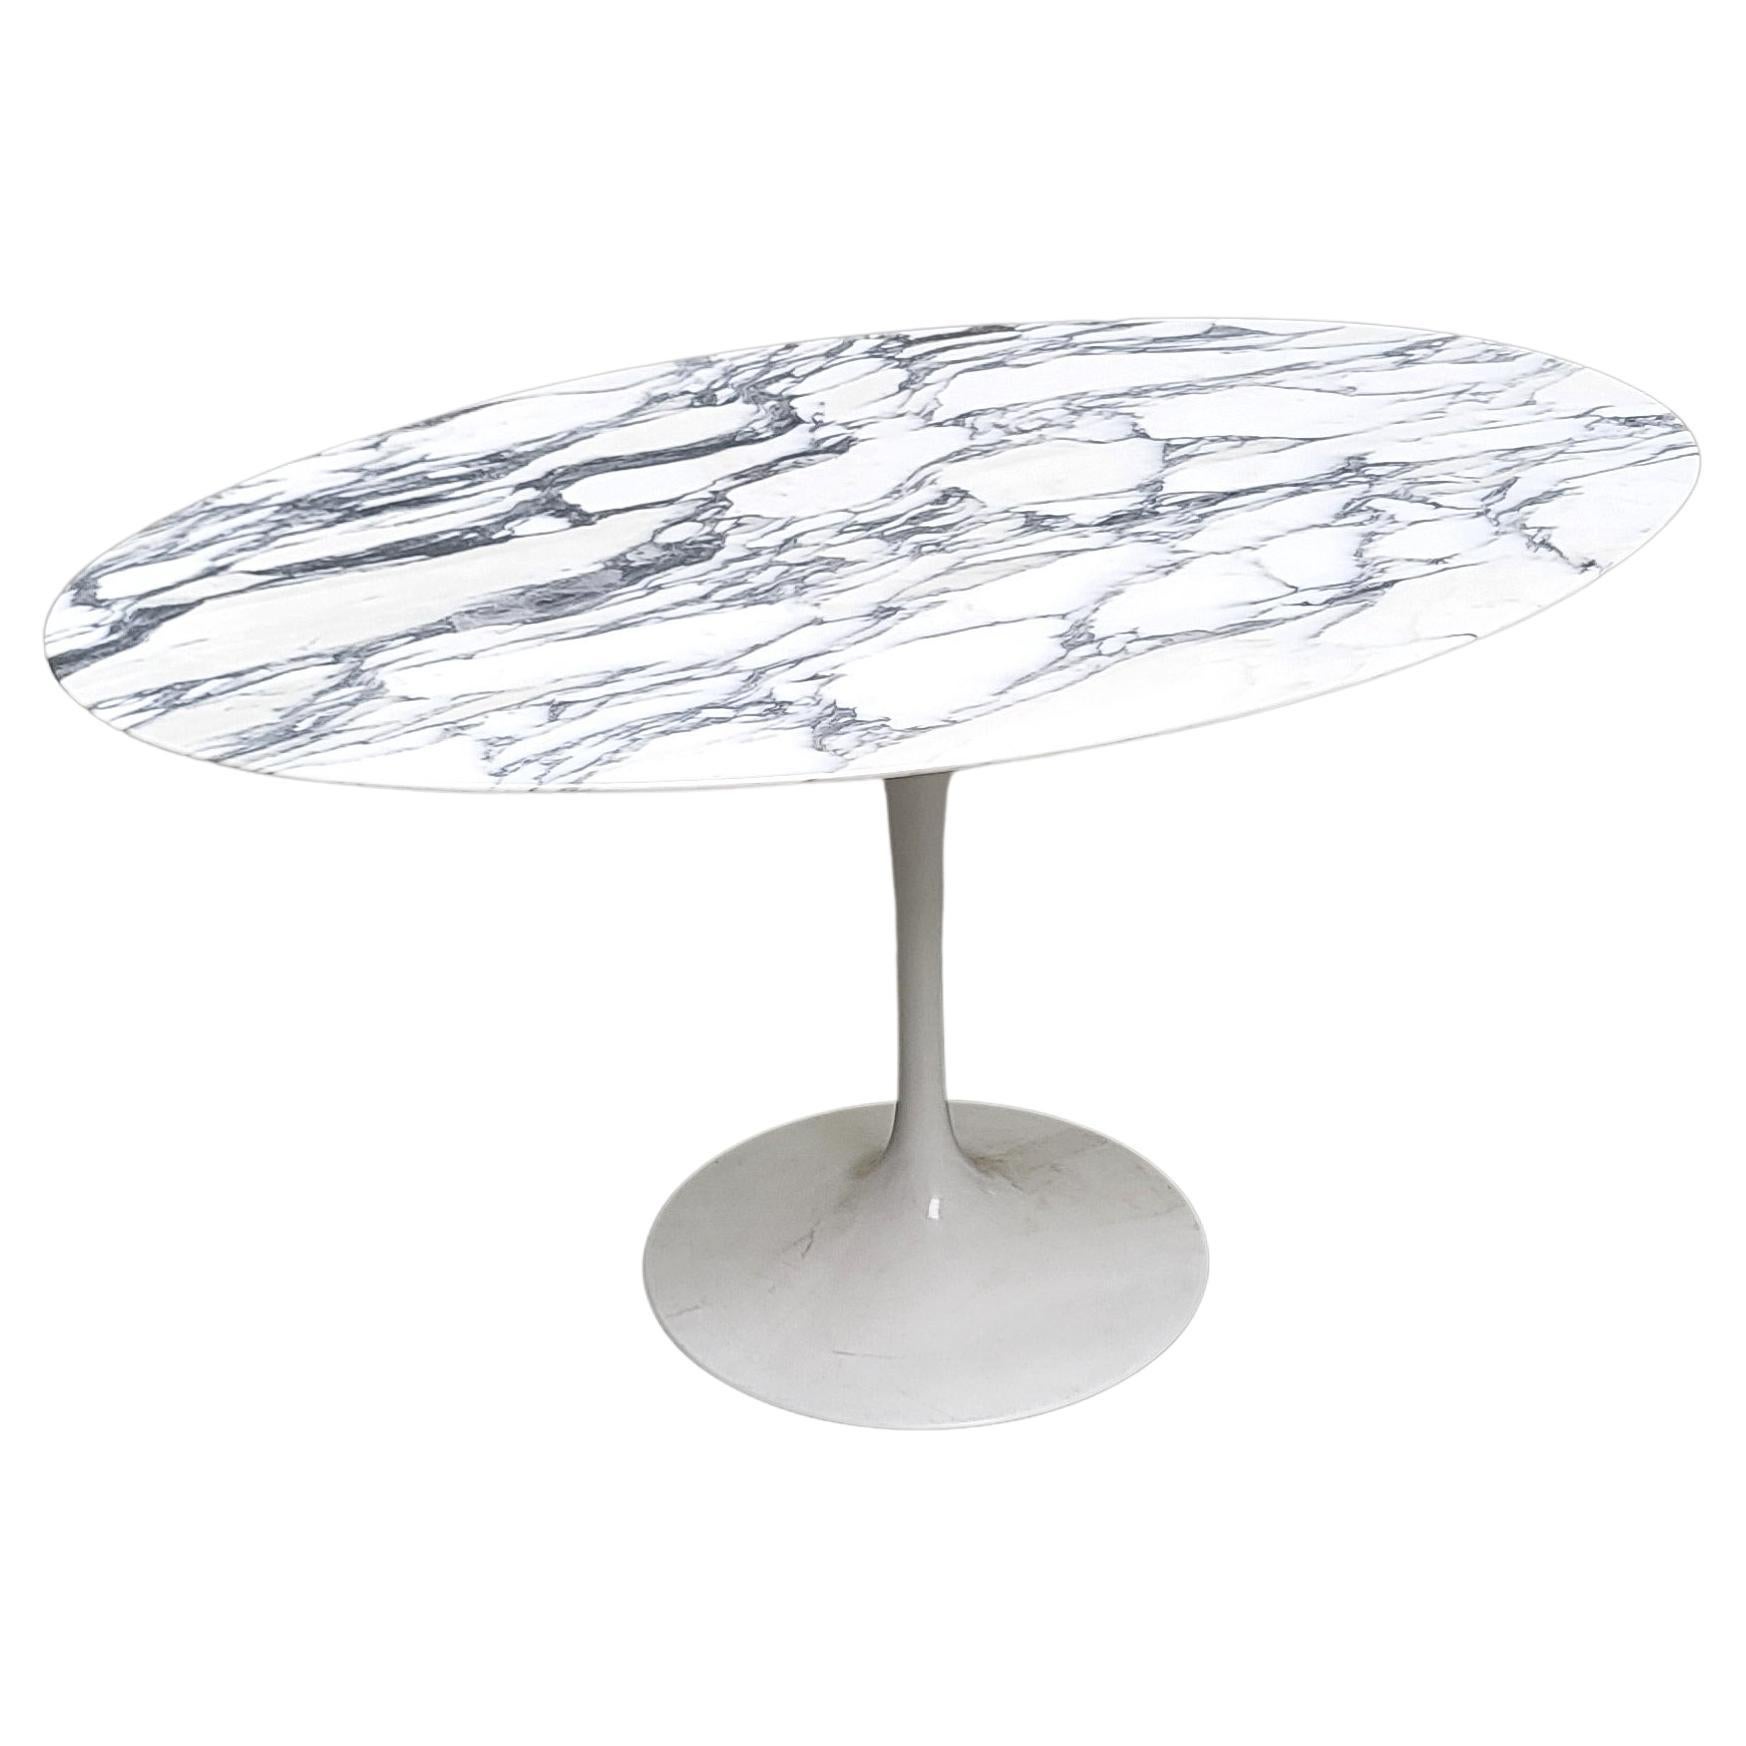 Eero Saarinen Oval Marble Tulip Dining Table by Knoll 1970s For Sale